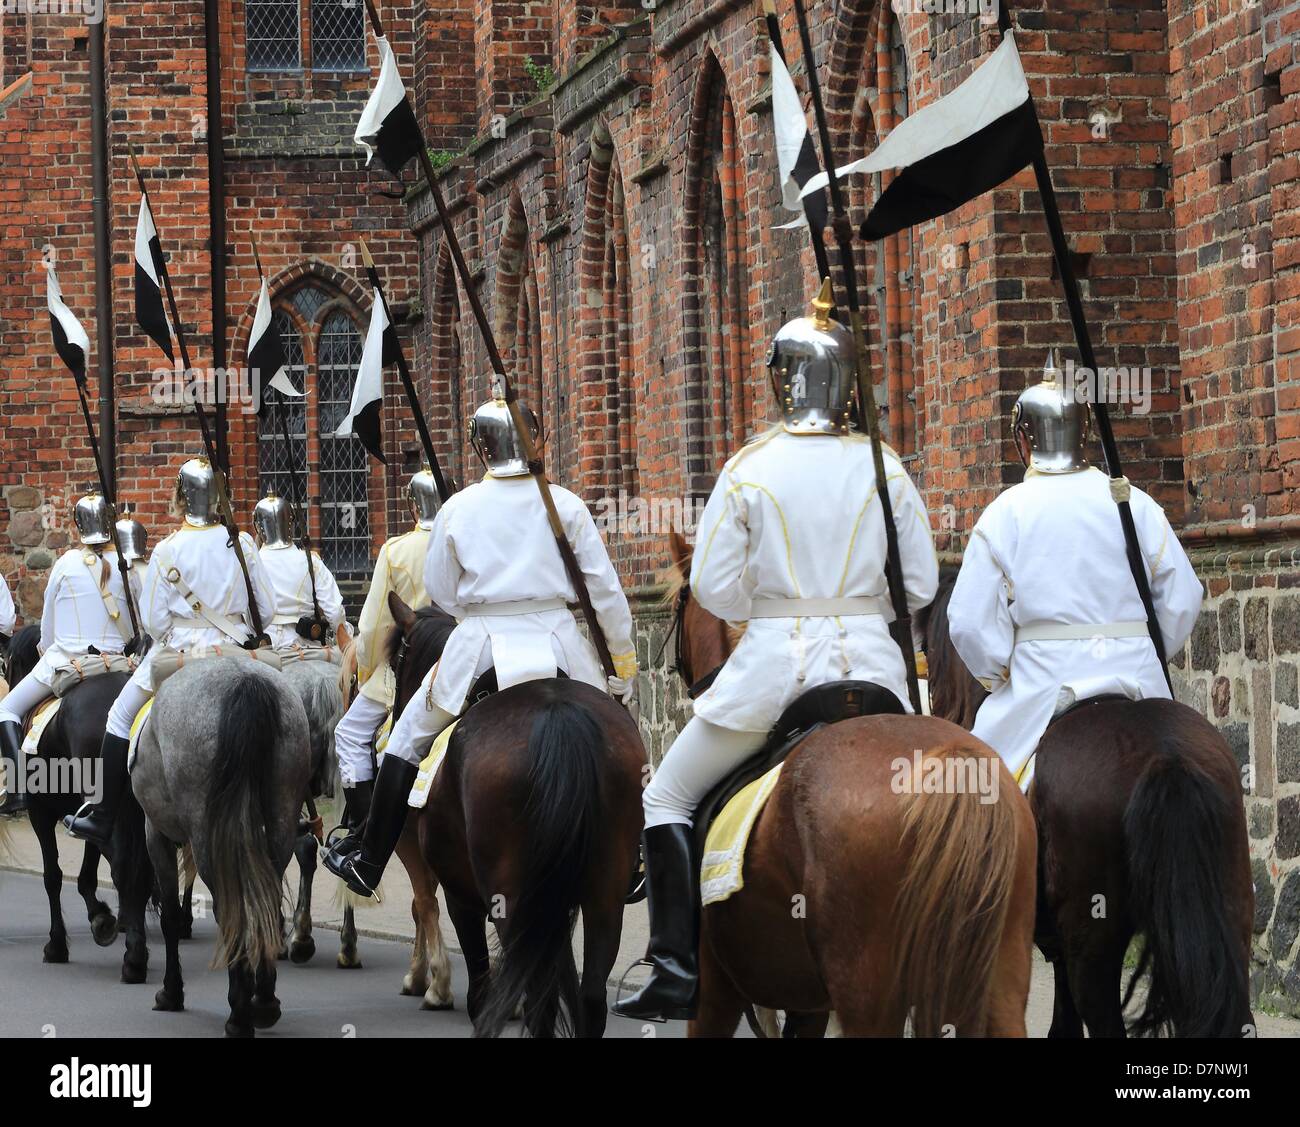 Members of the traditional Magdeburg Hussar Regiment Number 10 arrive for a ceremonial roll call wearing historic uniforms on Marktplatz in Stendal, Germany, 11 May 2013. Events are being held to mark the 200th anniversary of the calvary regiment's formation in the Prussian Army in Stendal. Photo: JENS WOLF Stock Photo